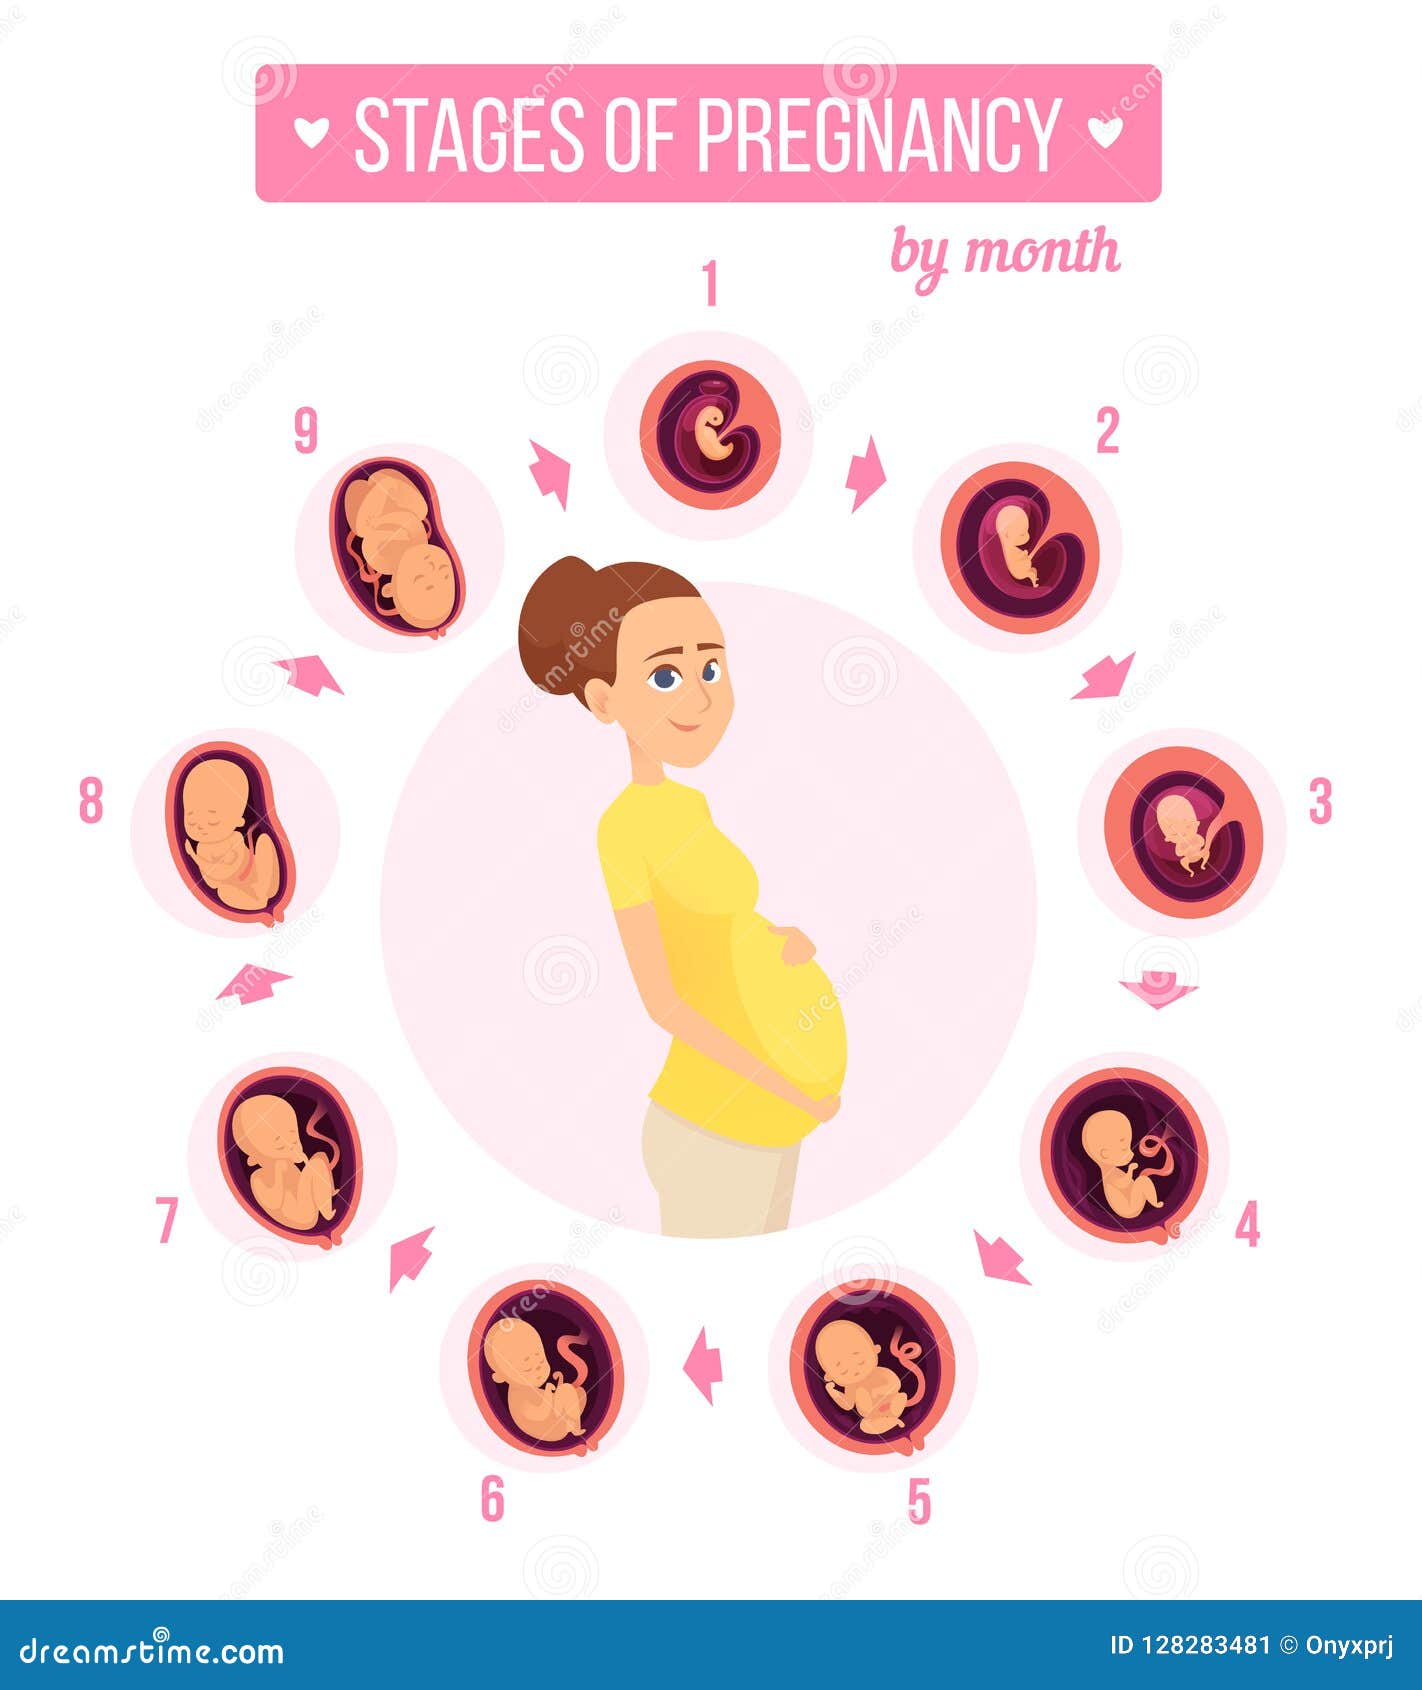 pregnancy trimester infographic. human growth stages new born baby development egg embryo fertility  s